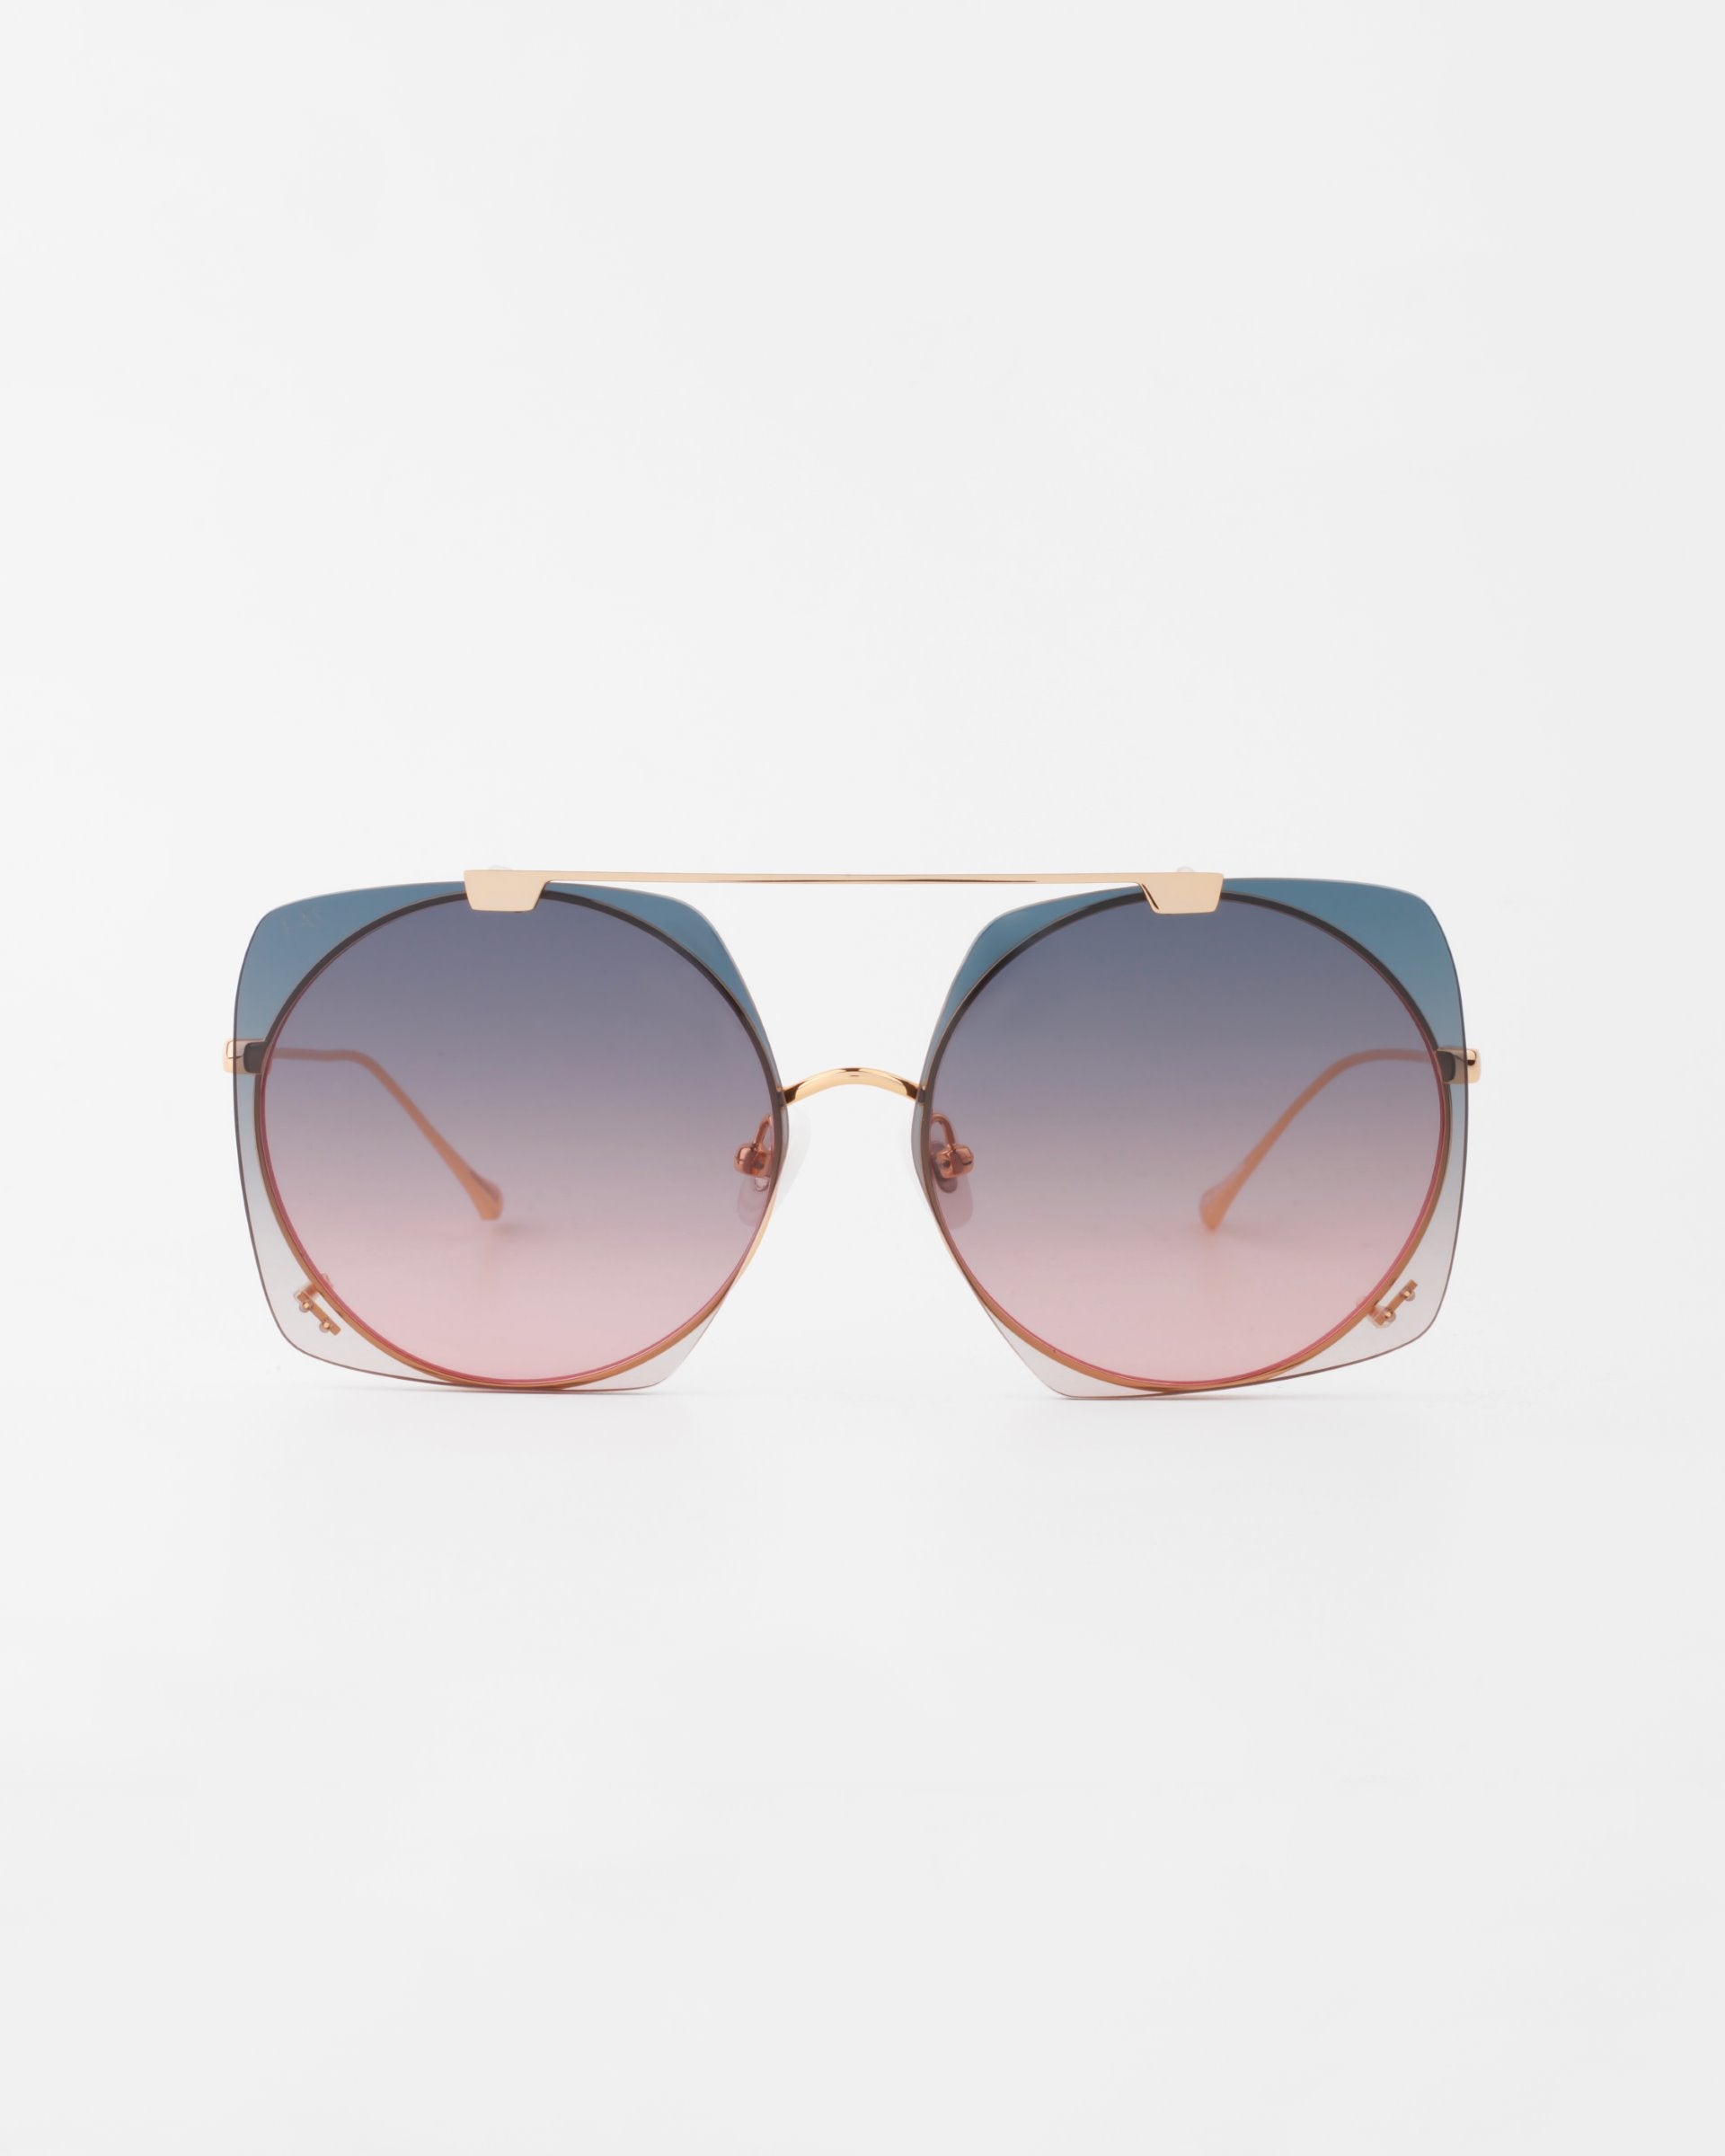 A pair of oversized, square-shaped Last Summer sunglasses by For Art's Sake® with gradient lenses, transitioning from dark blue at the top to light pink at the bottom. The glasses feature a thin, 18-karat gold-plated metal frame and a double bridge design, providing complete UVA & UVB protection.